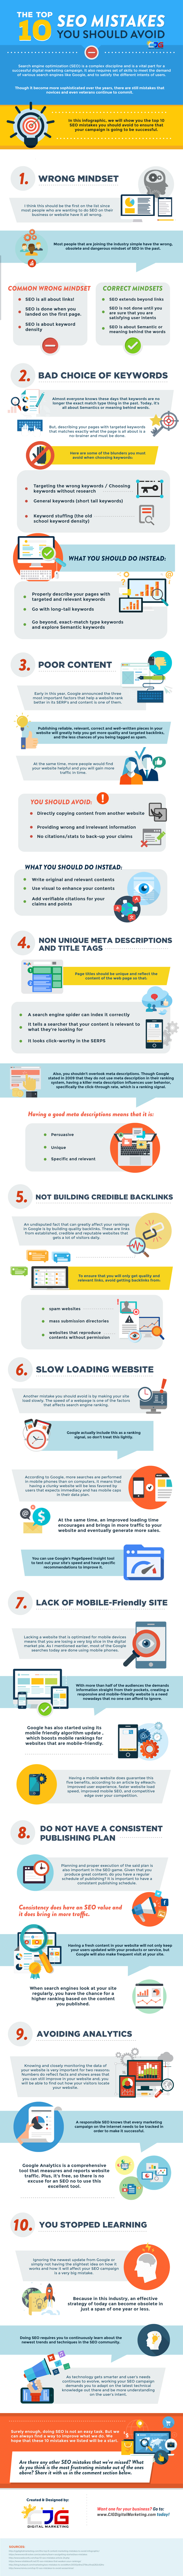 The Top 10 SEO Mistakes You Should Avoid [Infographic]